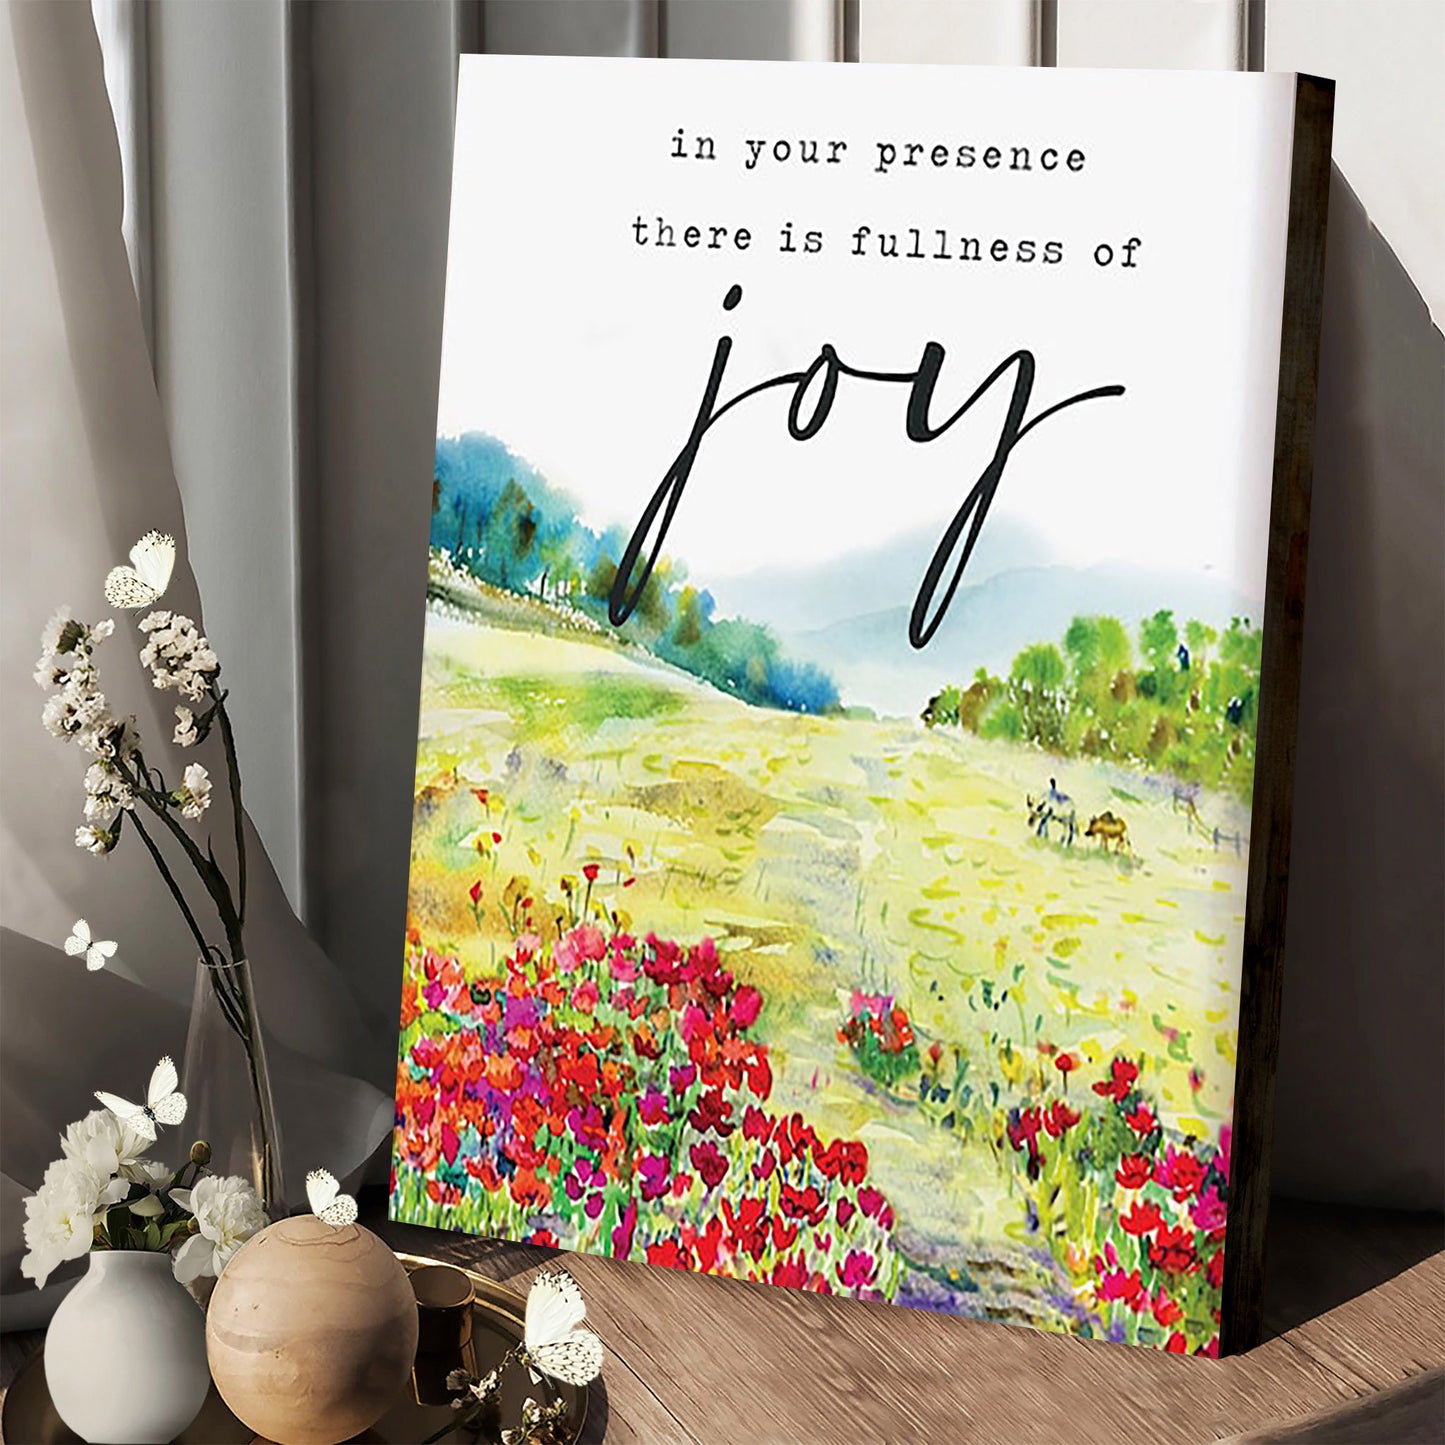 In Your Presence There Is Fullness Of Joy - Jesus Christ Canvas - Christian Wall Art - Religious Canvas Art